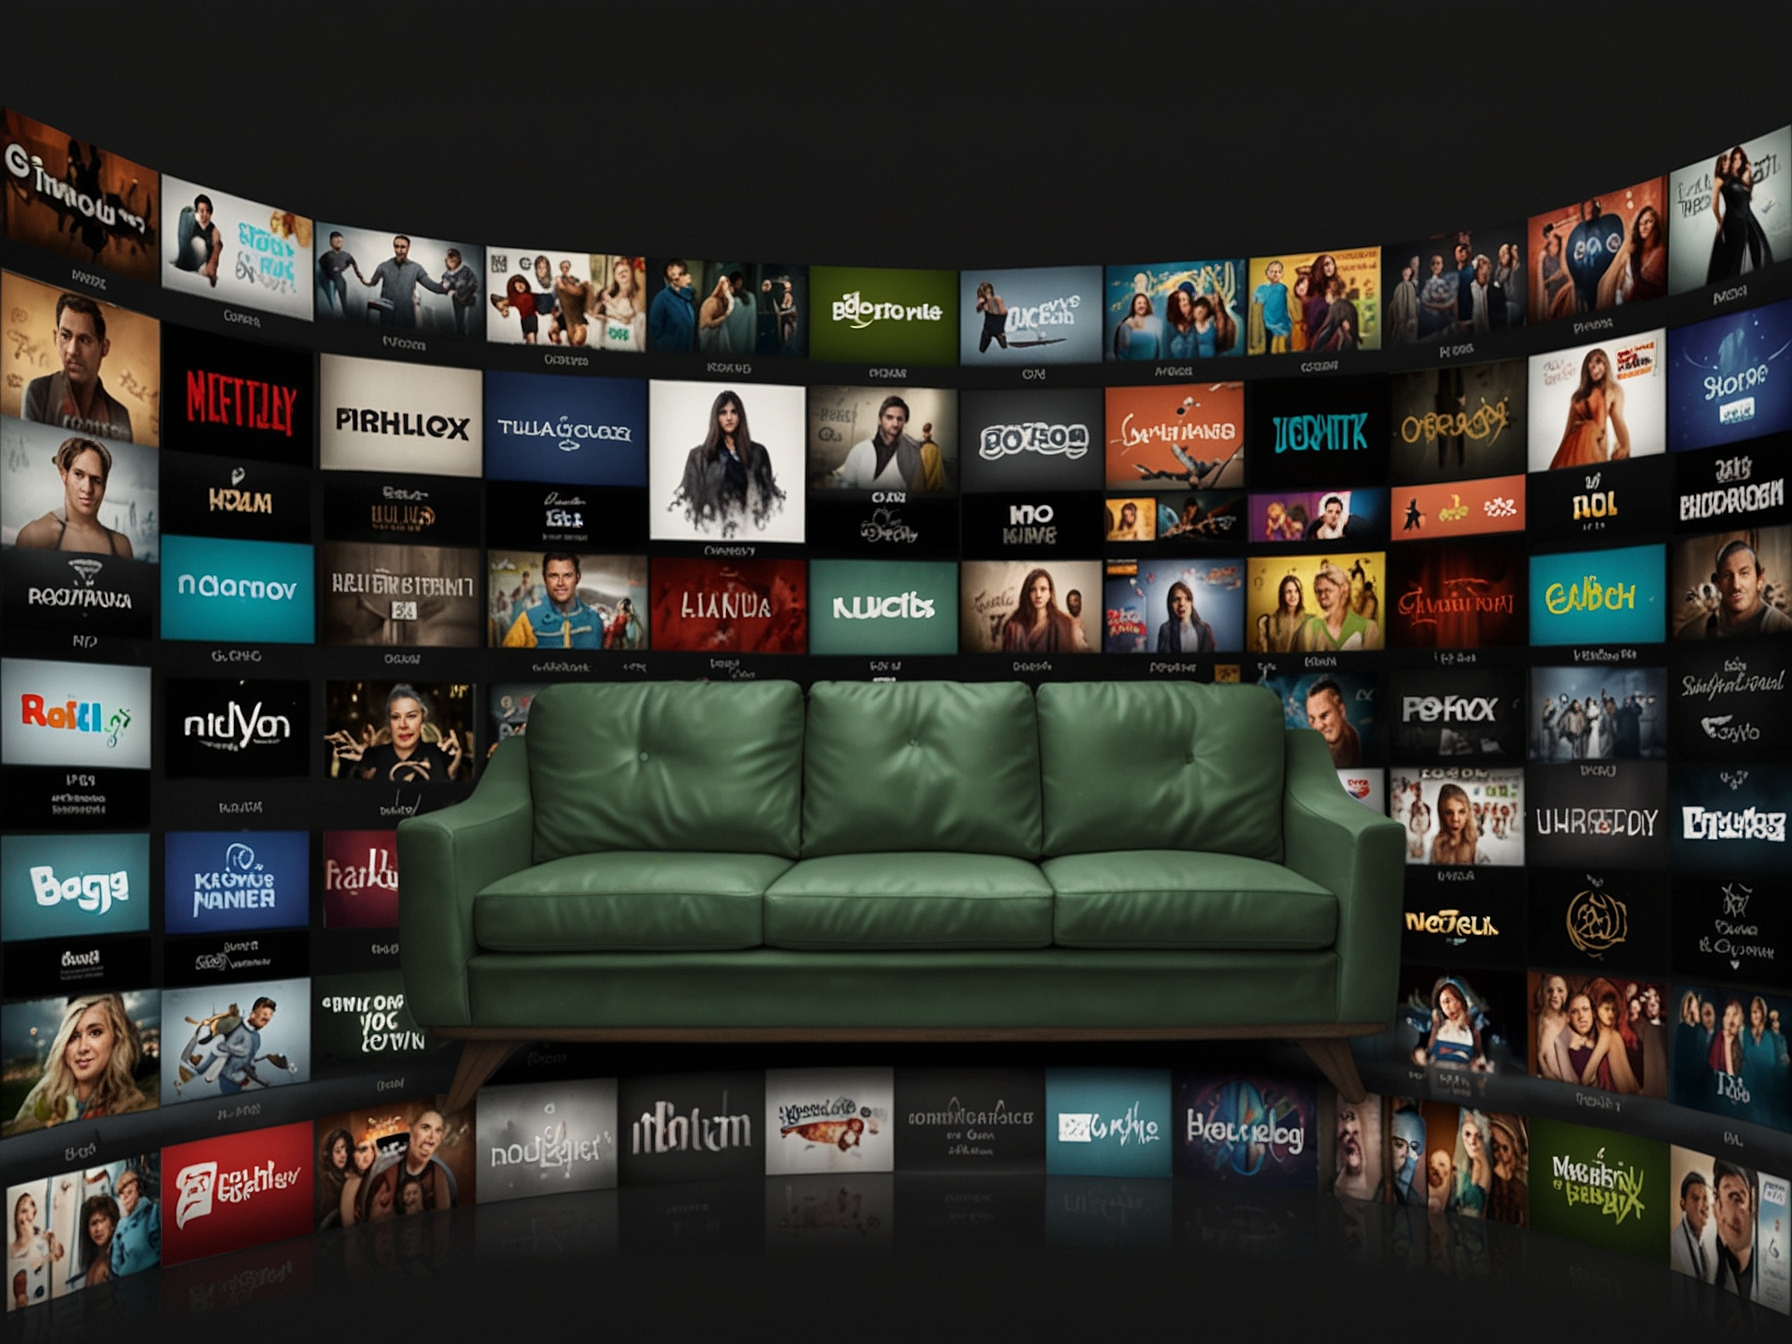 A visual guide depicting various streaming platforms such as Hulu + Live TV, Philo, and Sling TV, highlighting how viewers can watch Lifetime's 'The Bad Orphan' online without a traditional cable subscription.